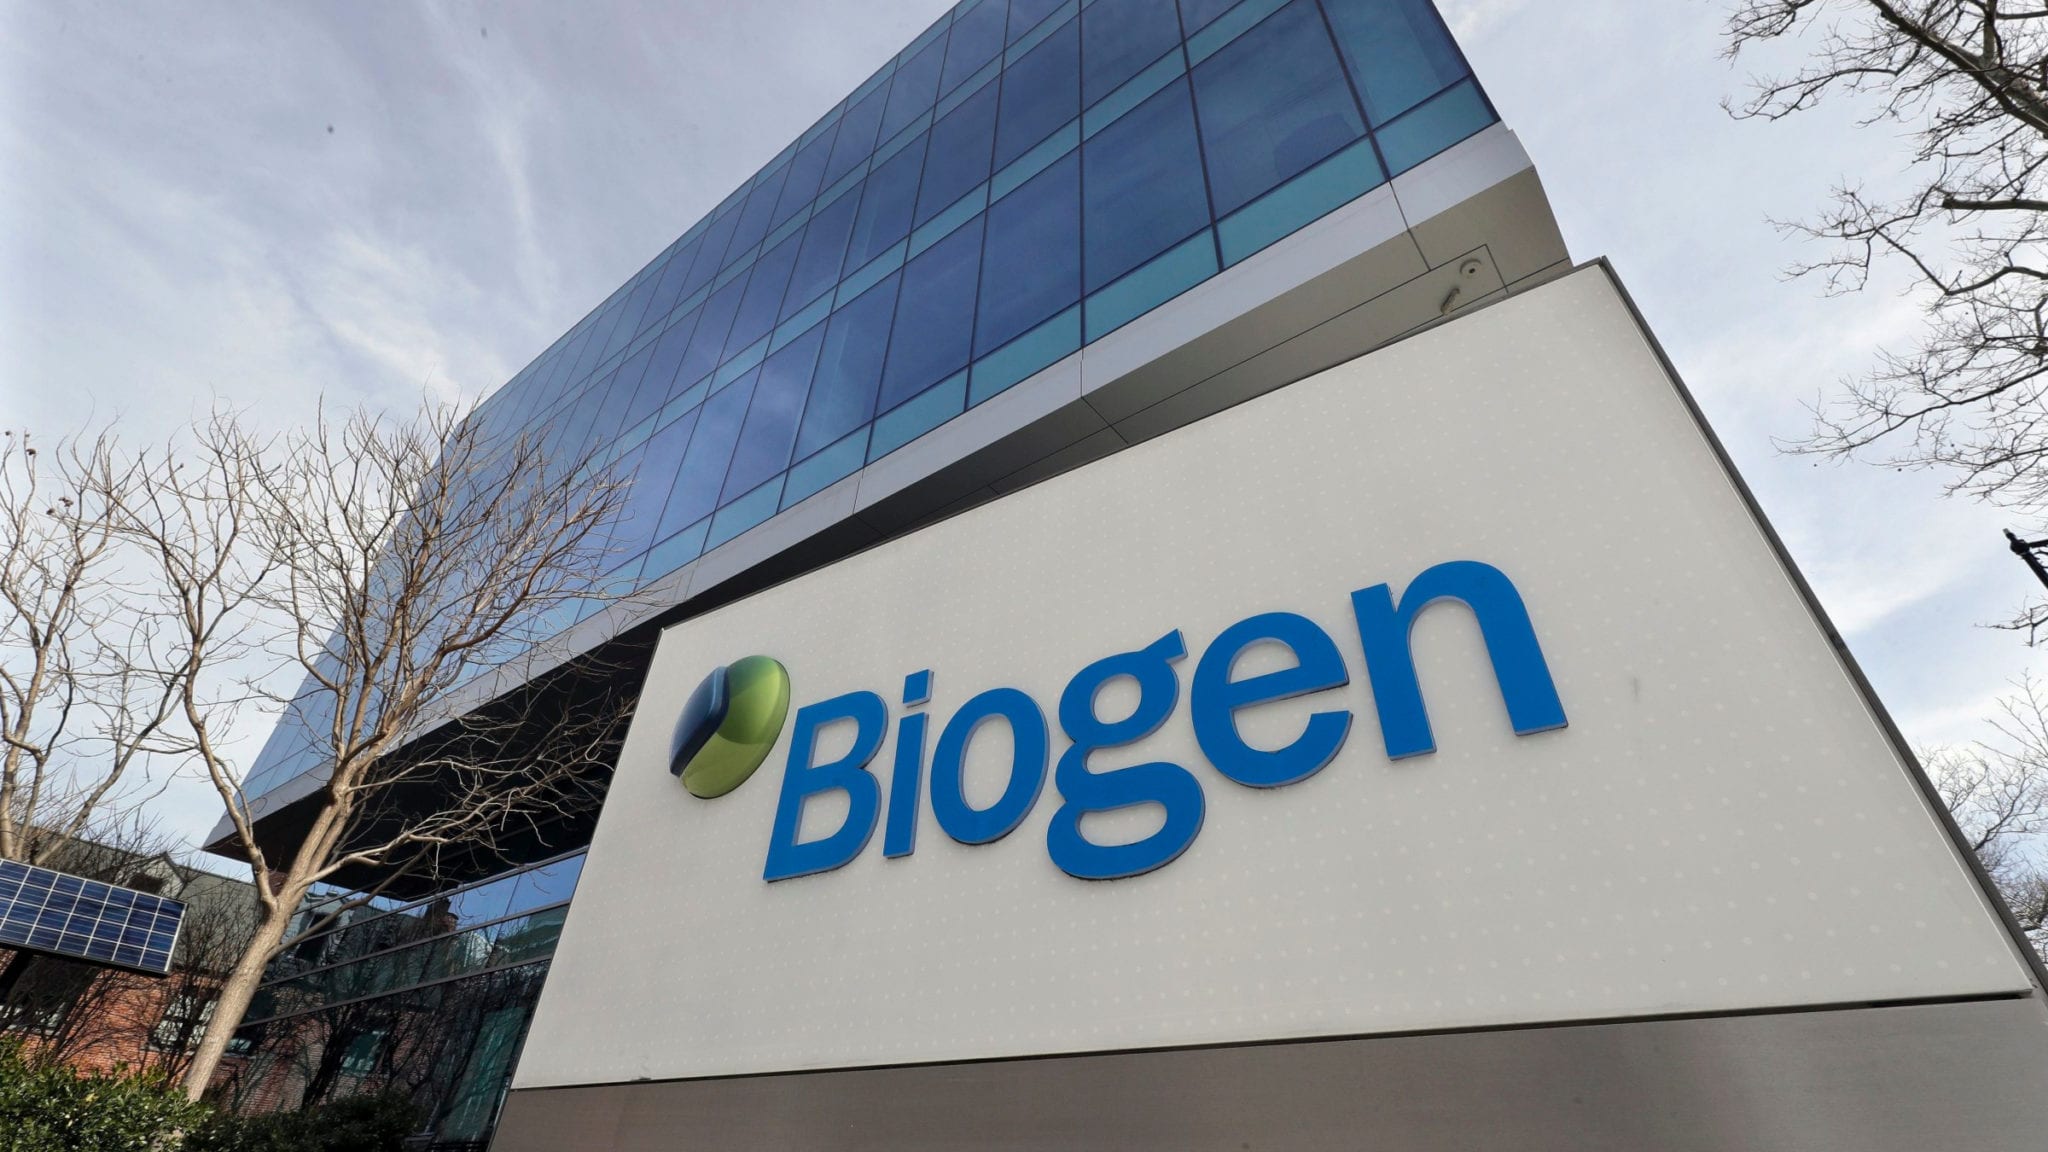 The Endpoints poll: A large majority of biopharma execs turn thumbs down on Biogen's controversial pitch for aducanumab